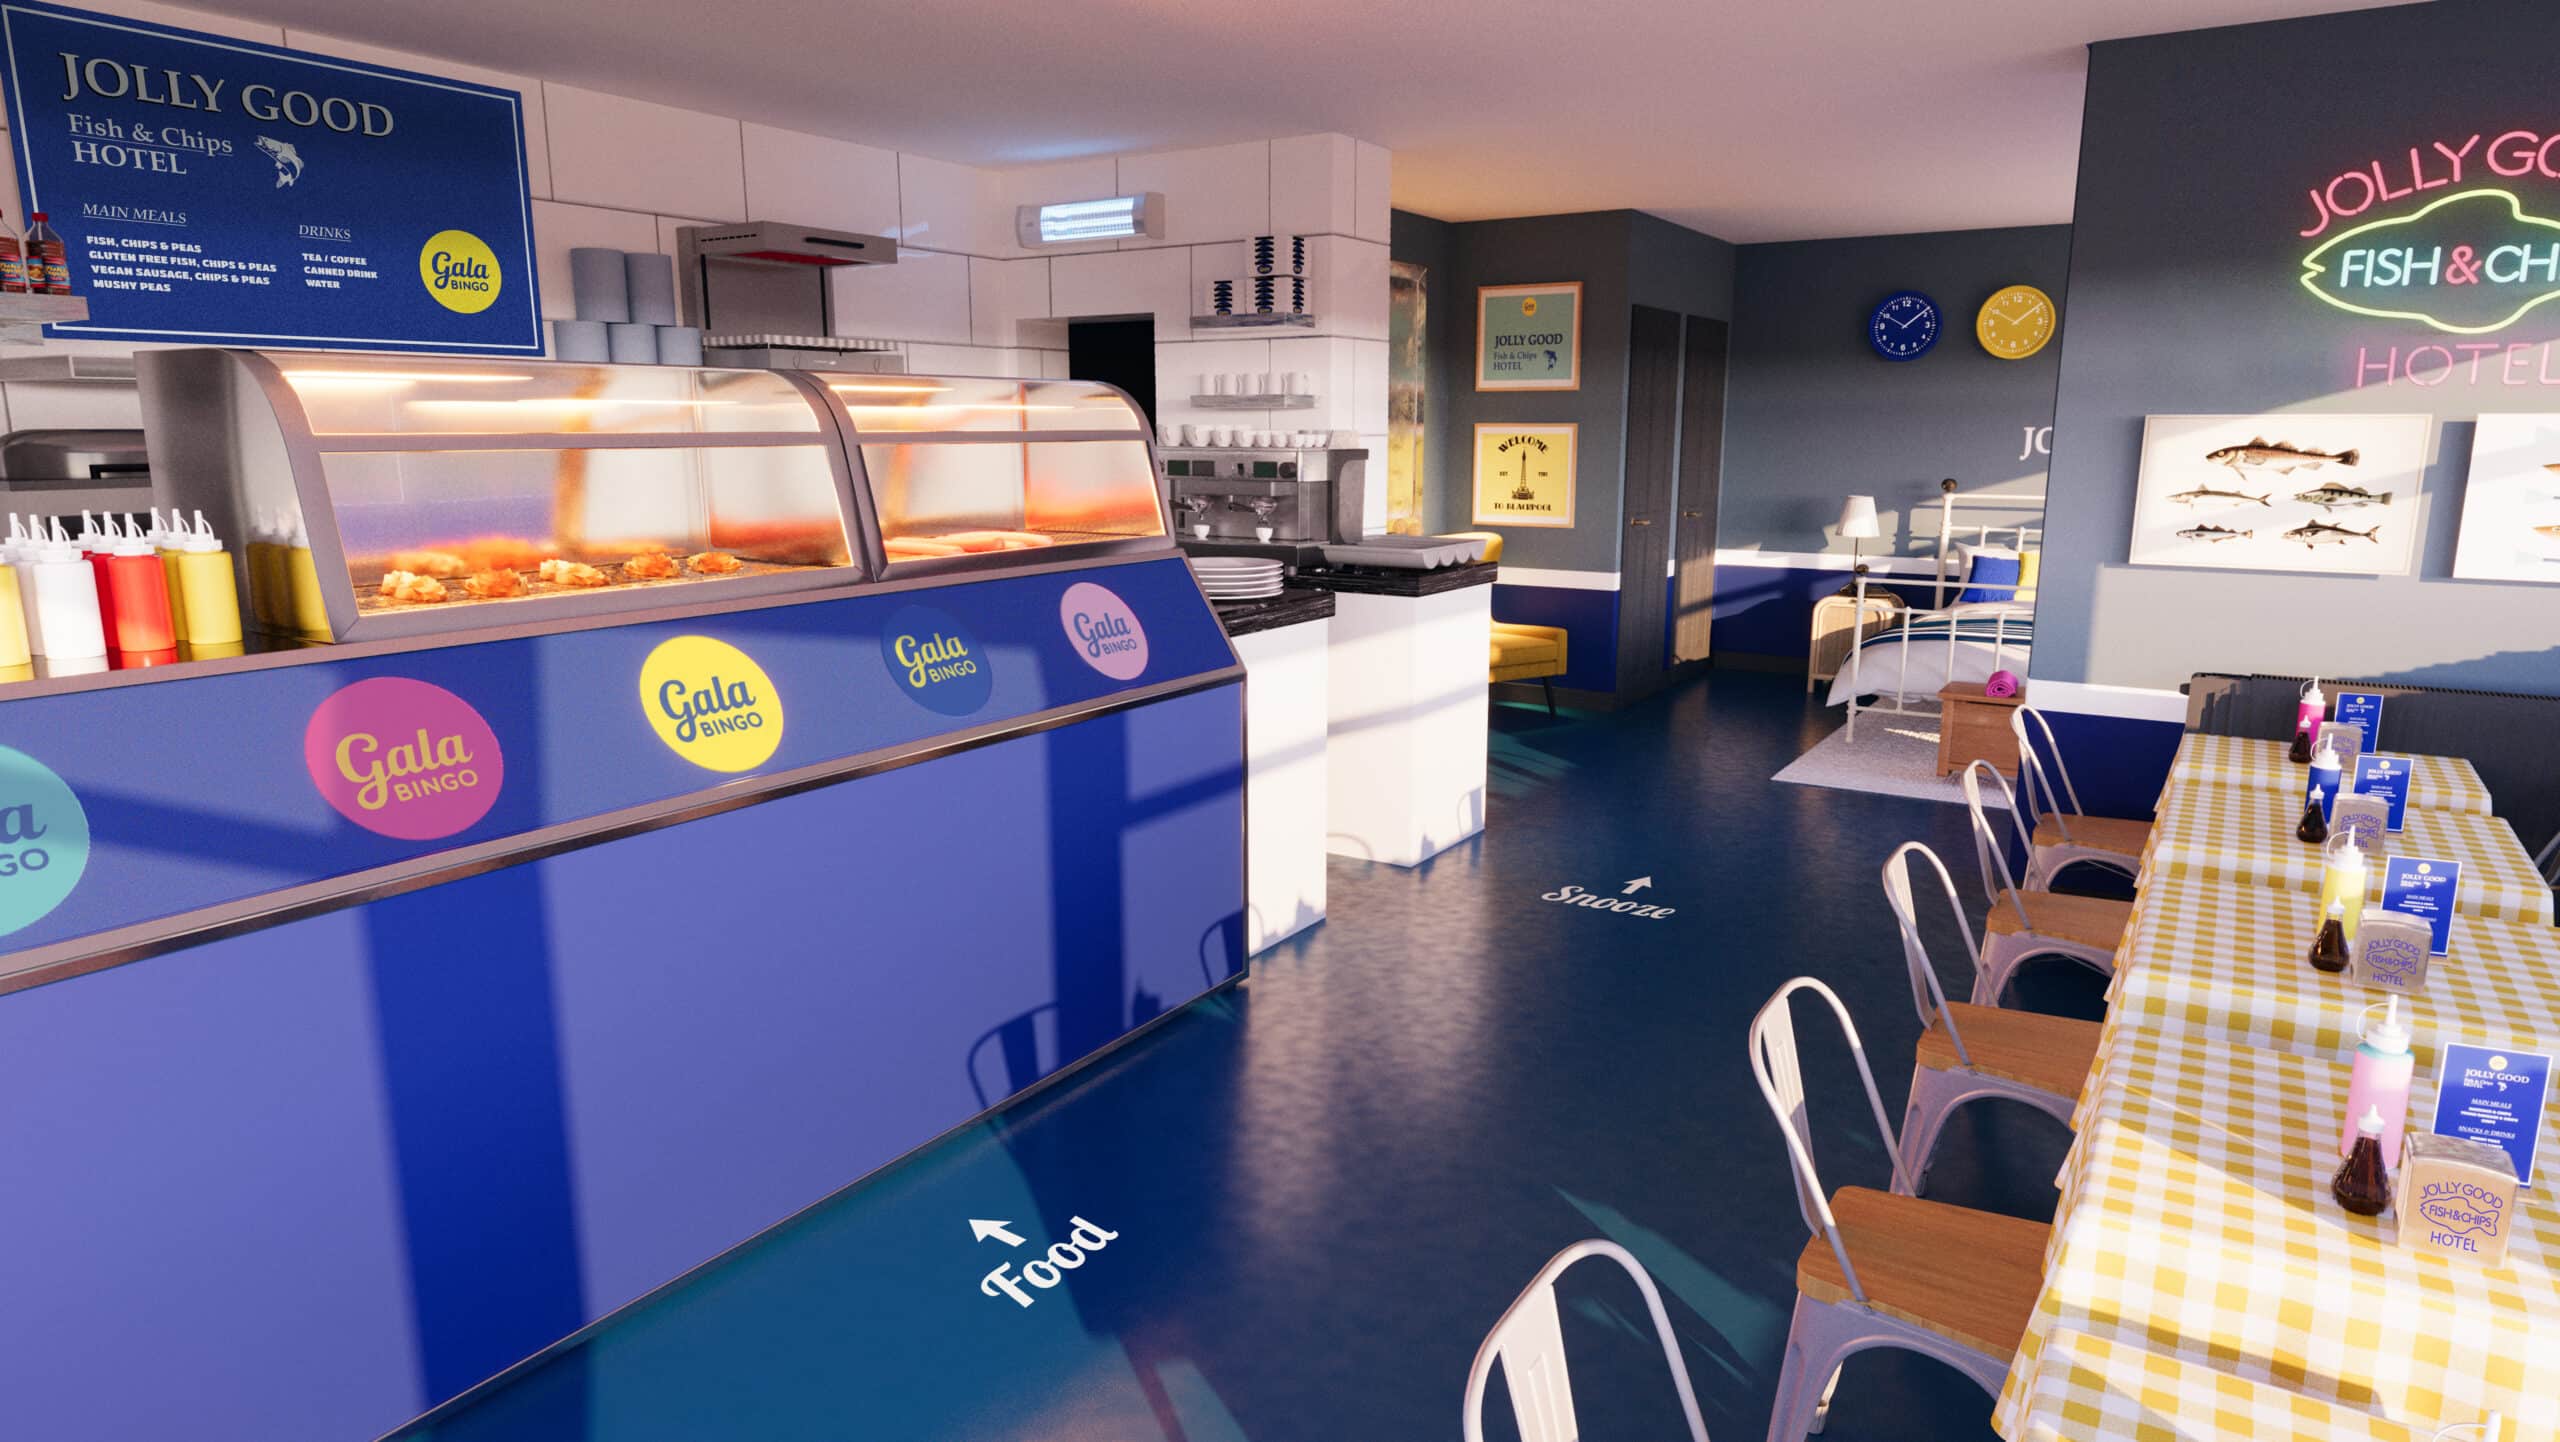 The interior of Gala's chippie